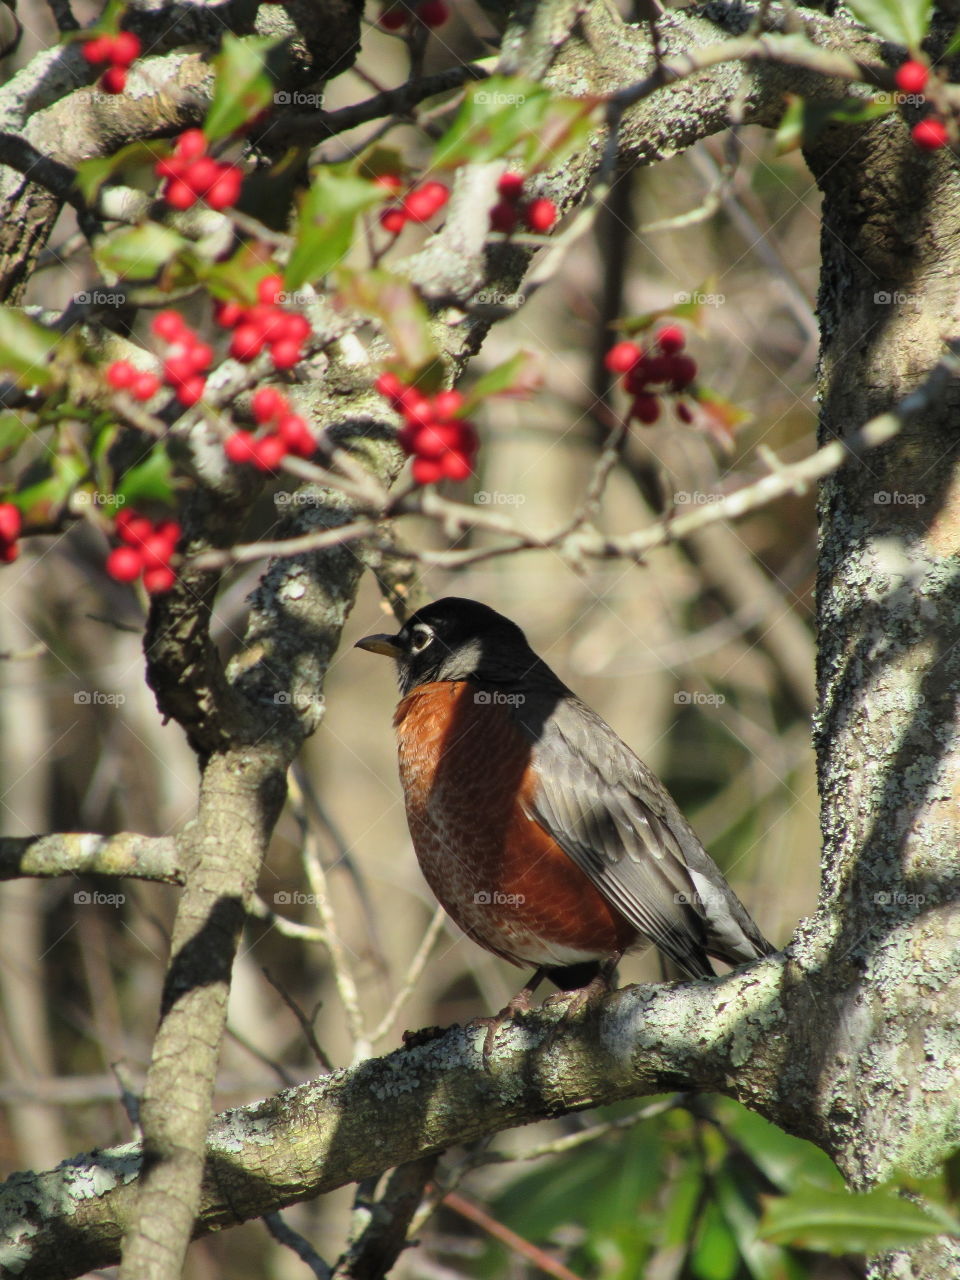 American Robin on a Holly tree branch